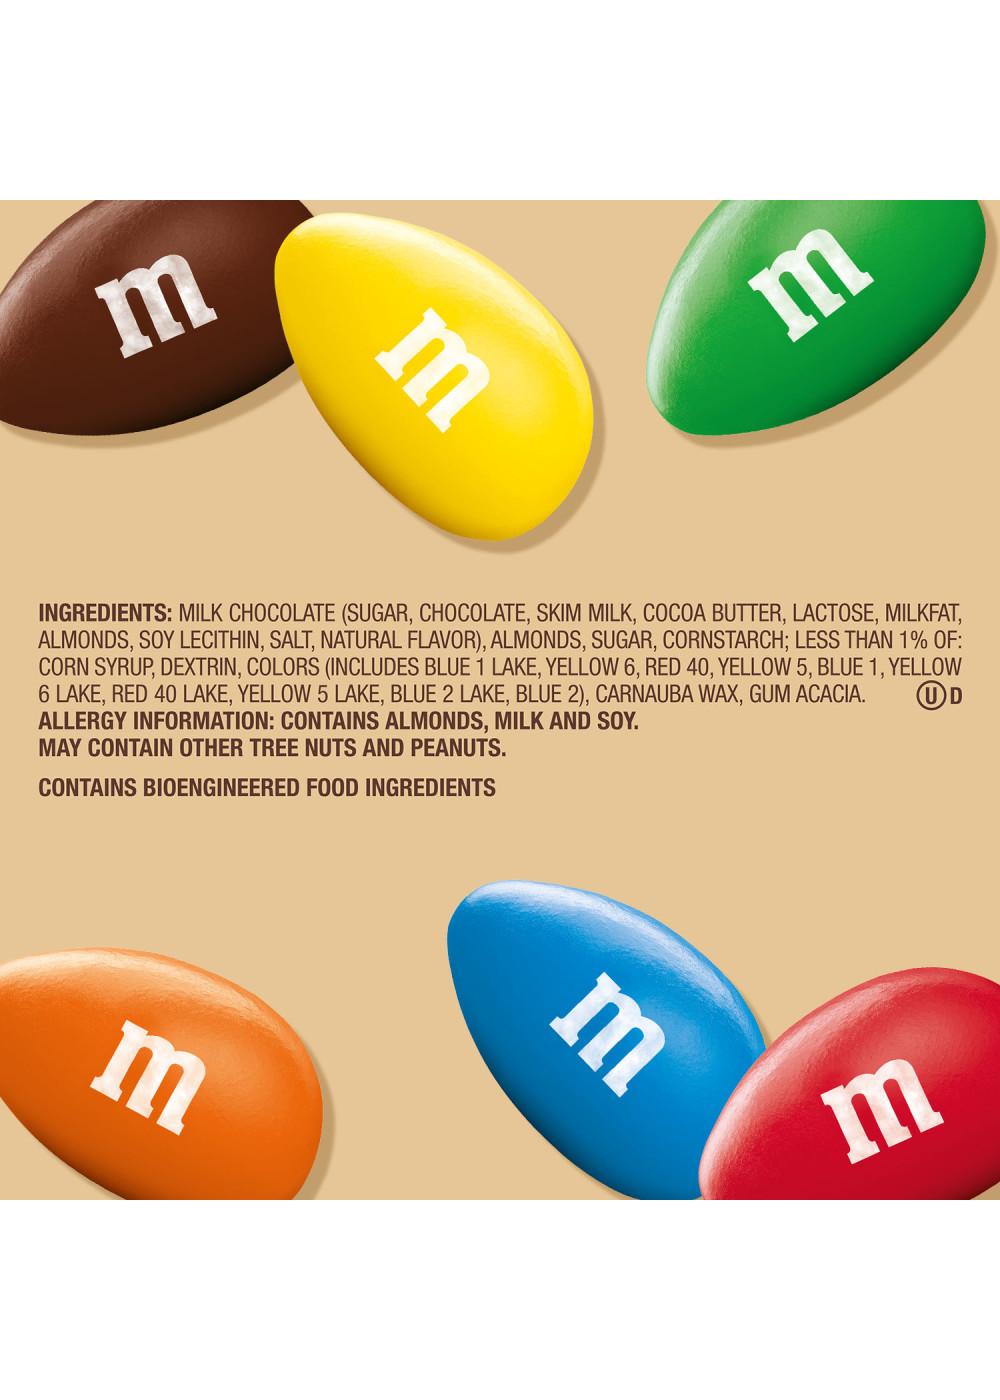 Save on M&M's Almond Chocolate Candies Family Size Order Online